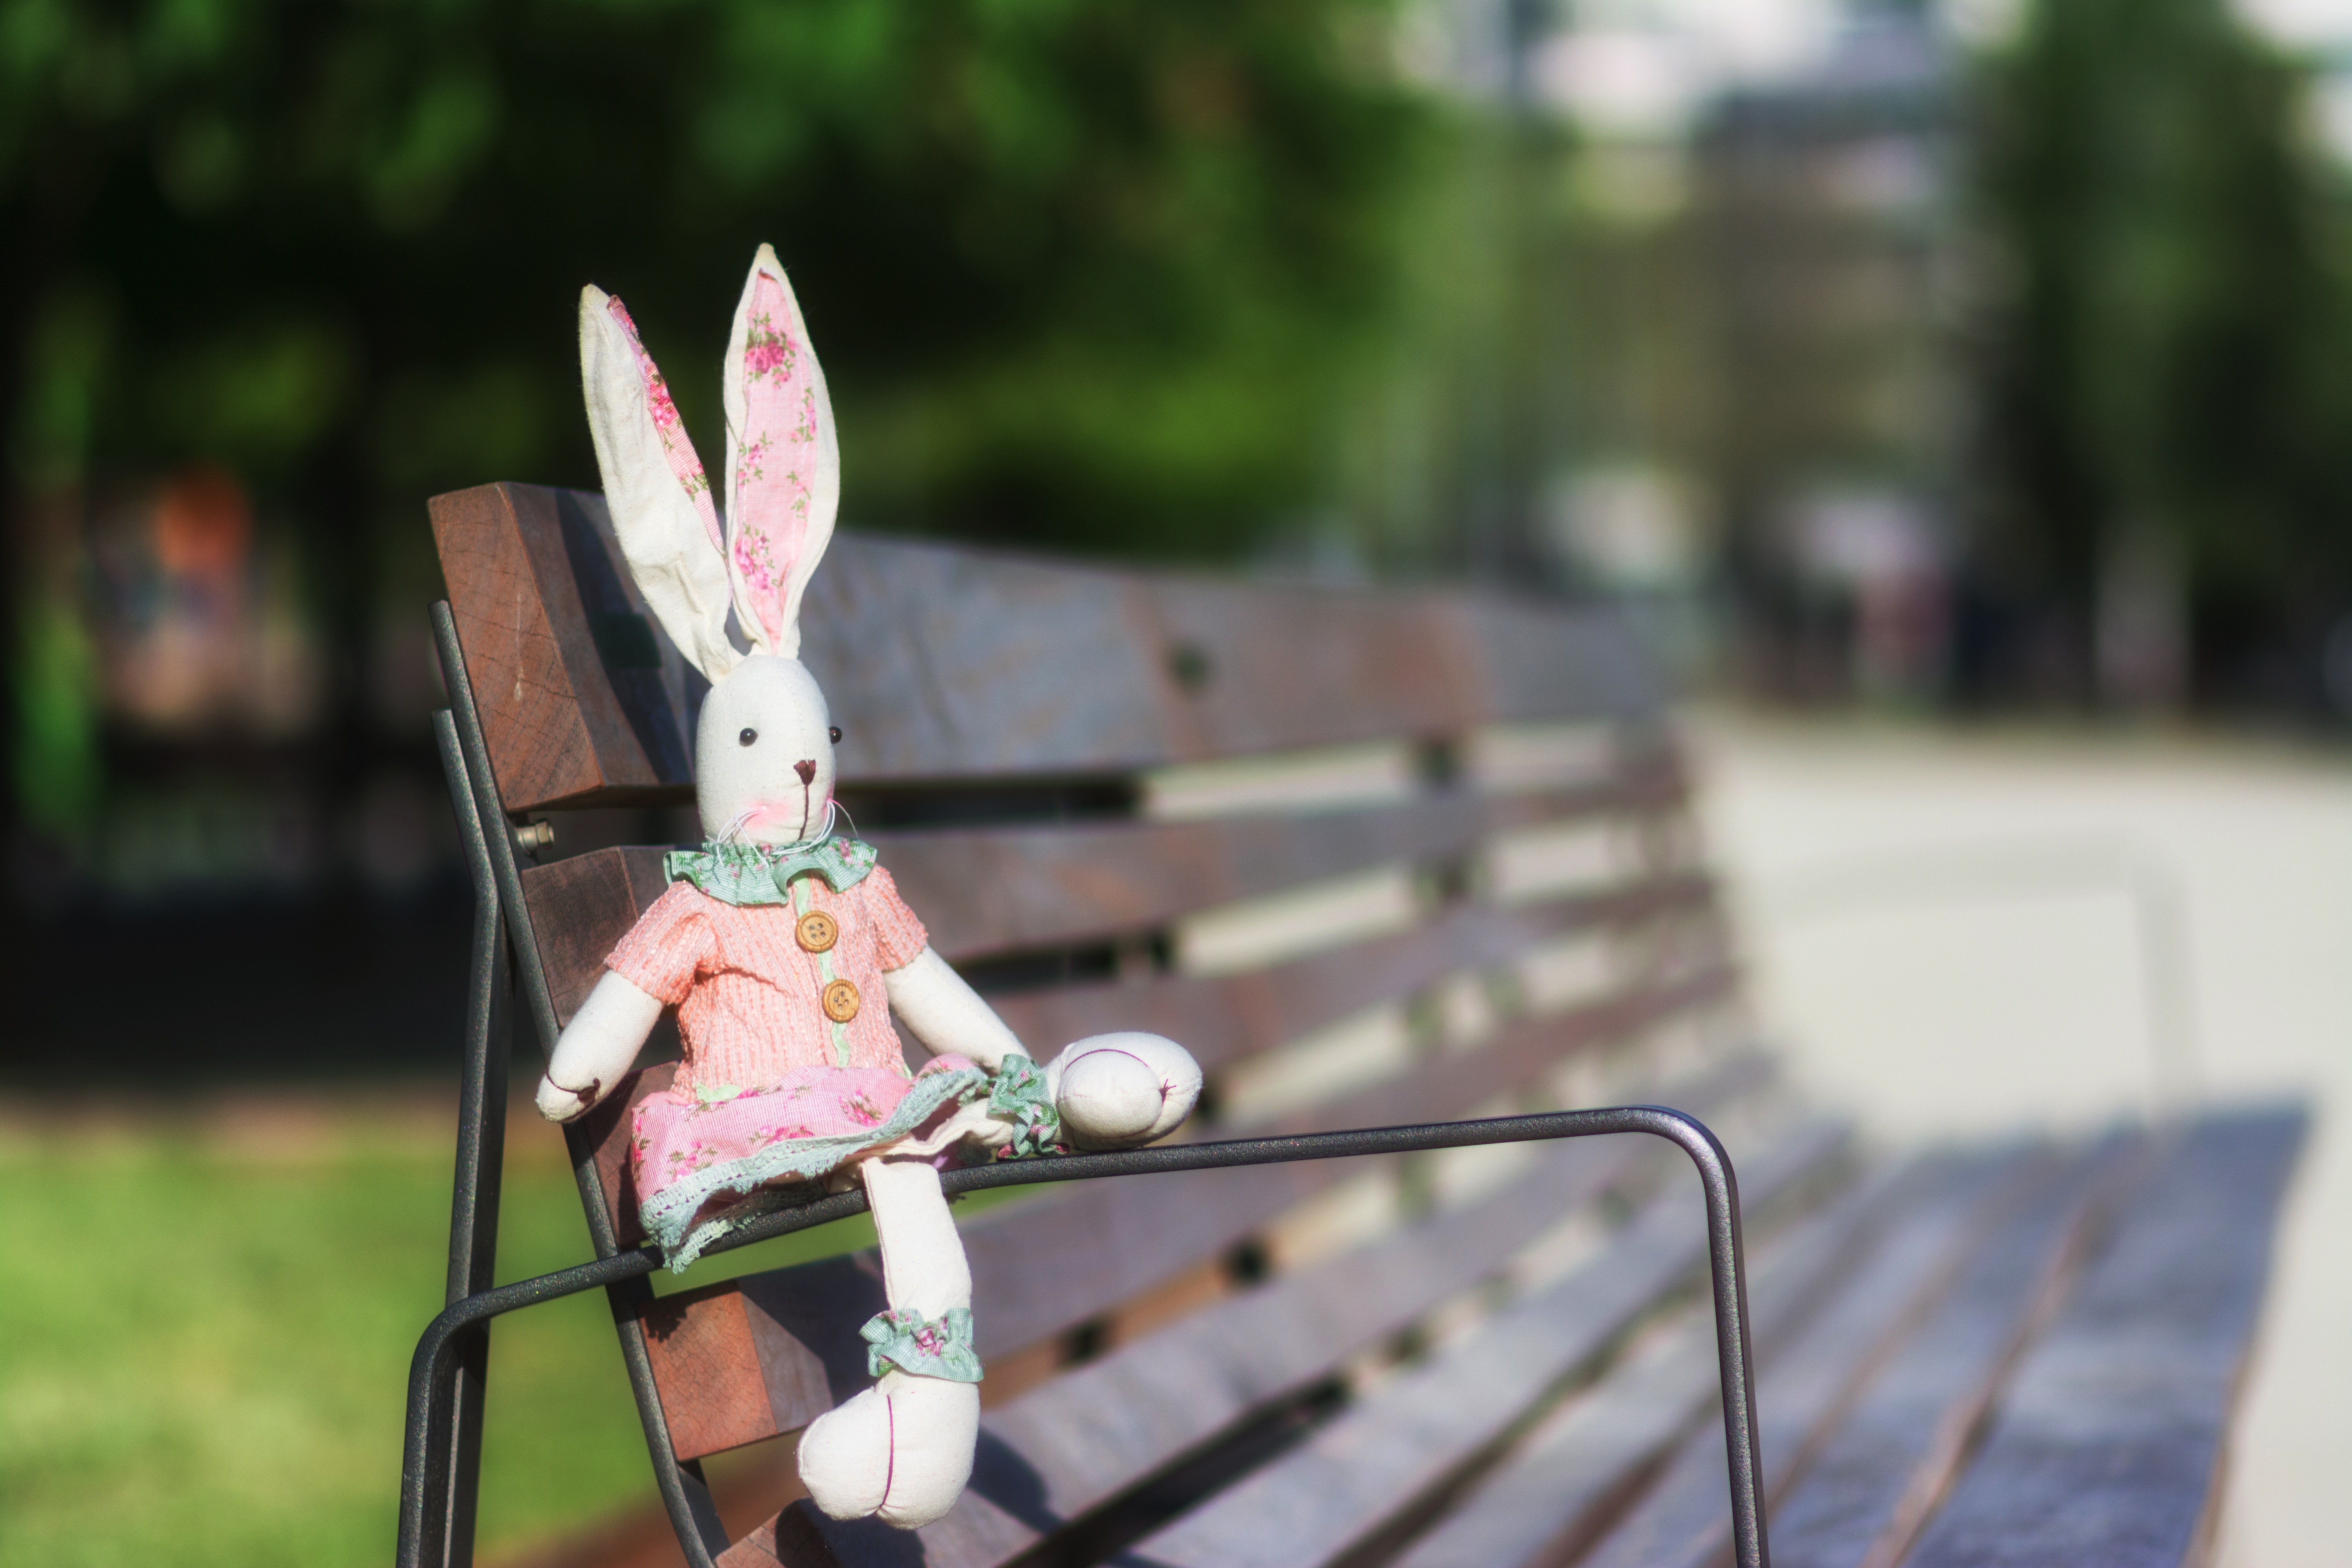 white rabbit plush toy and brown wooden bench